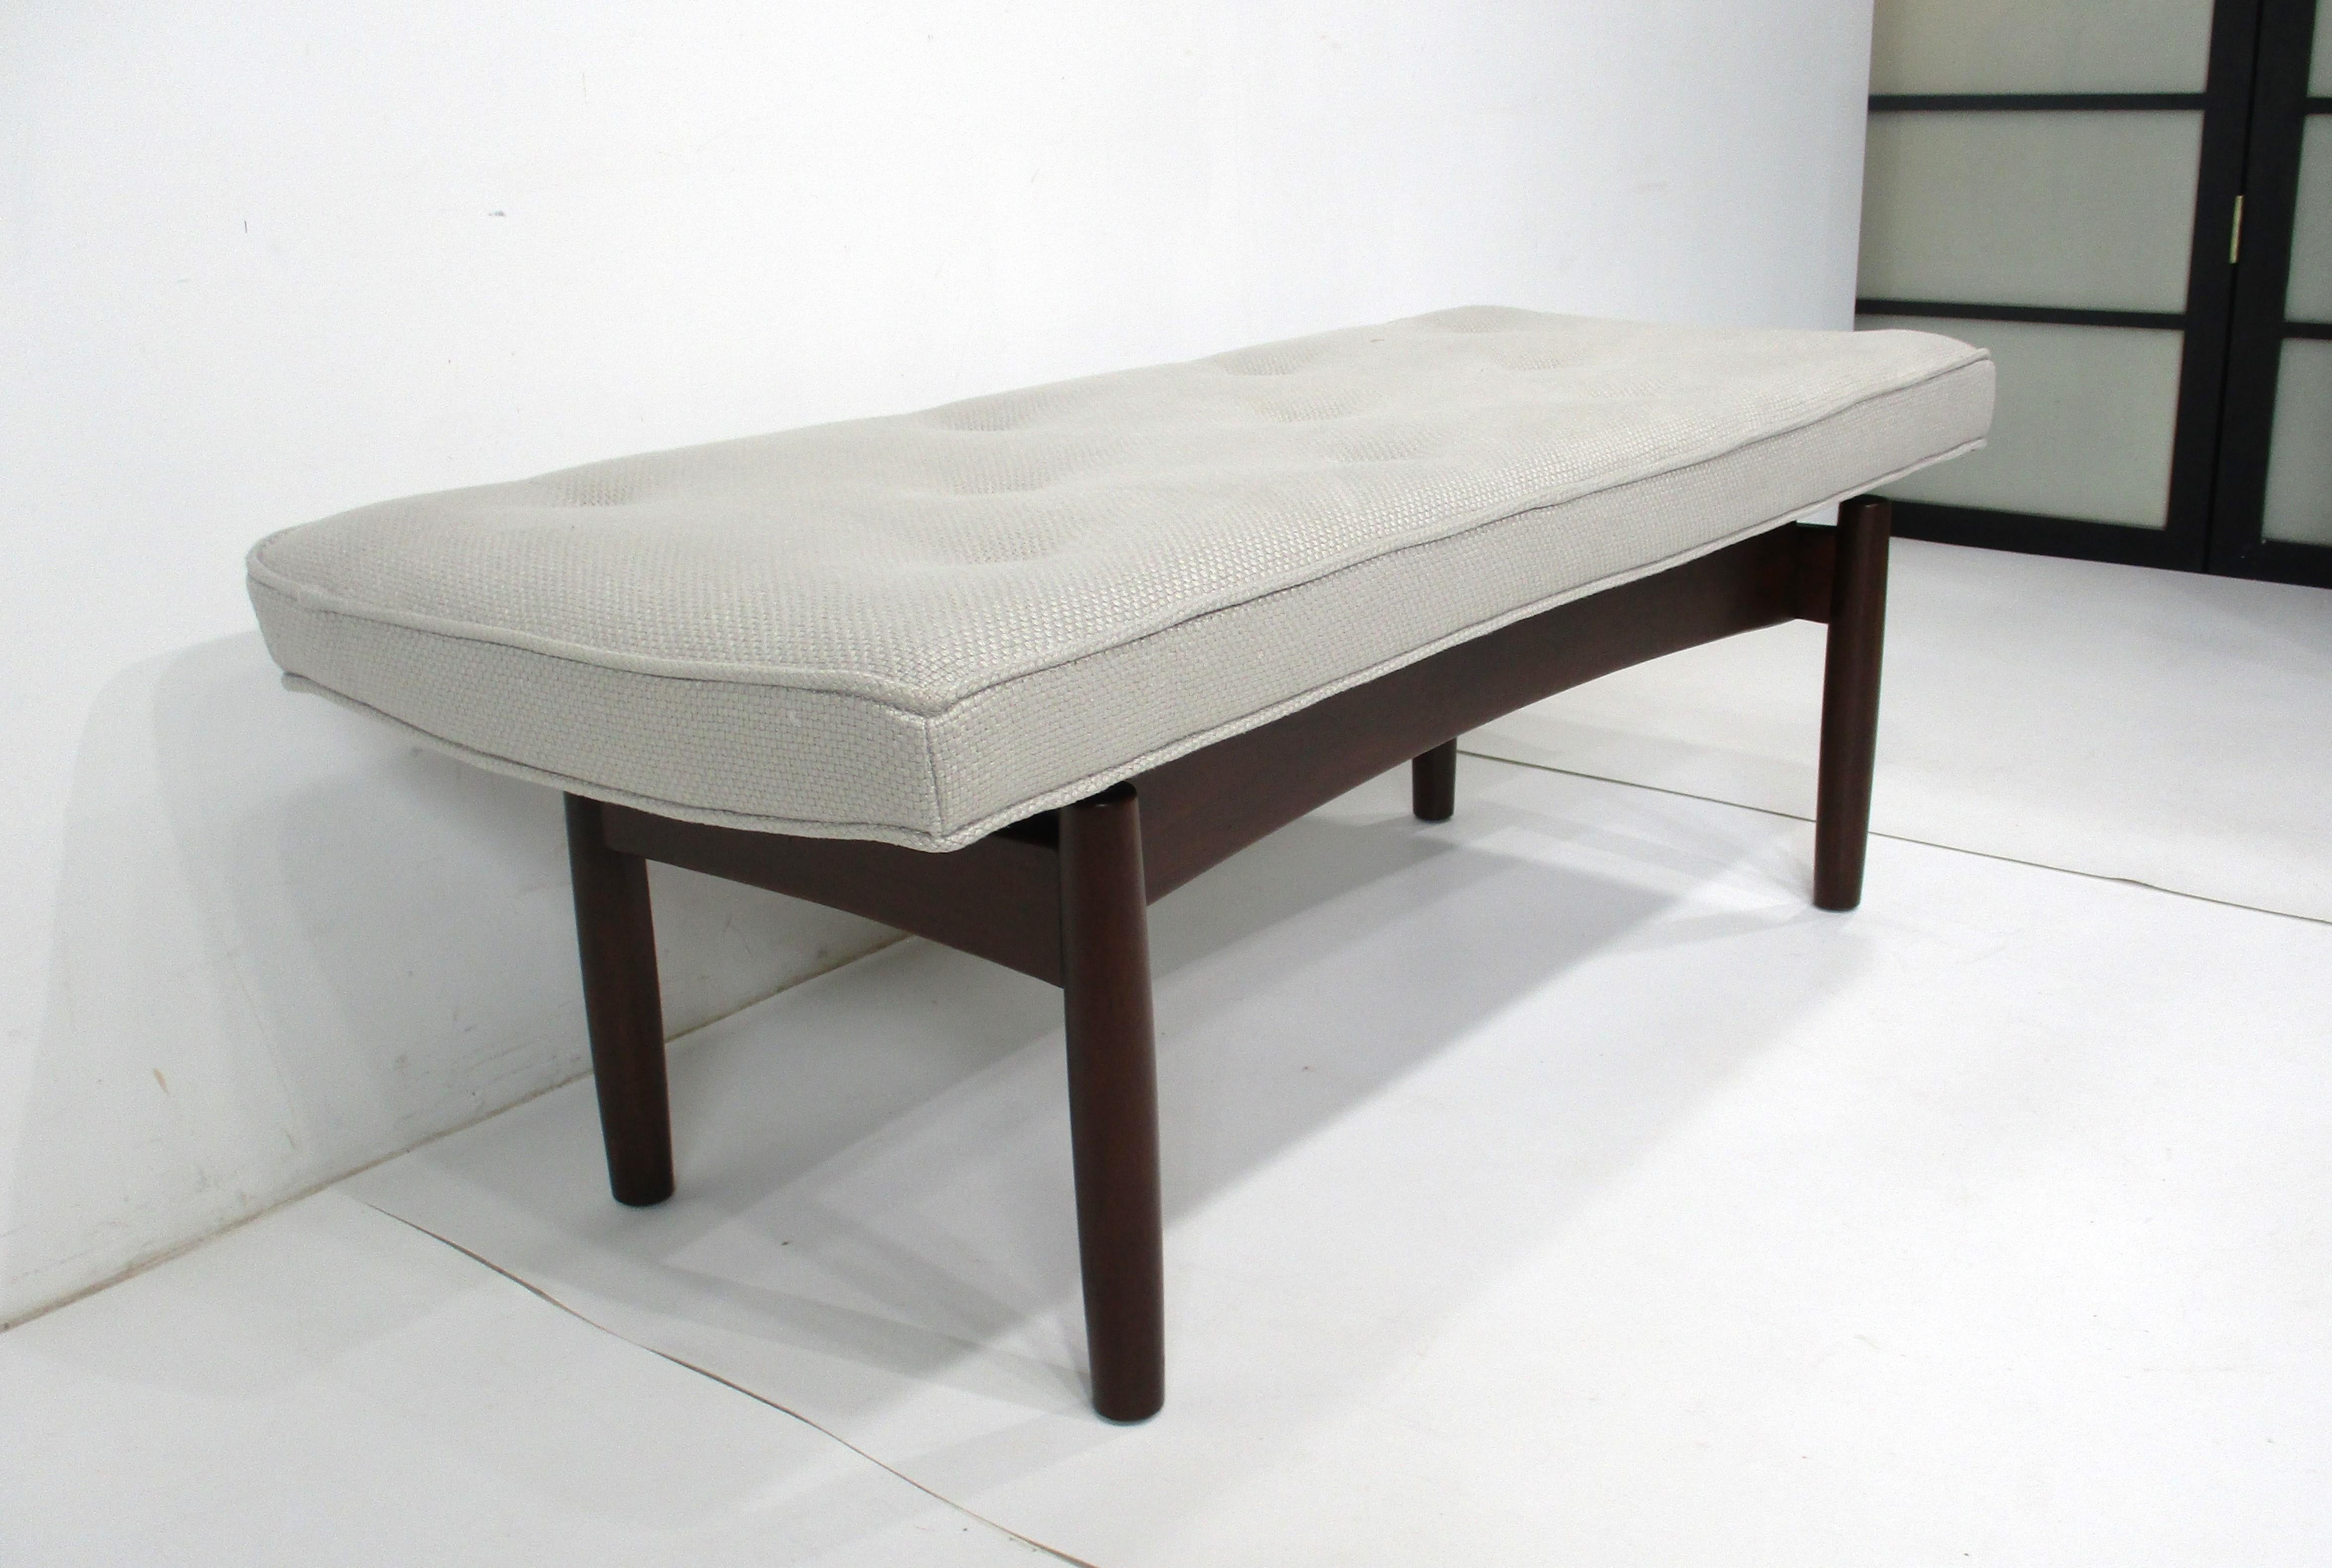 Upholstered Walnut Bench in the Style of Greta Grossman Danish Modern (A) For Sale 3